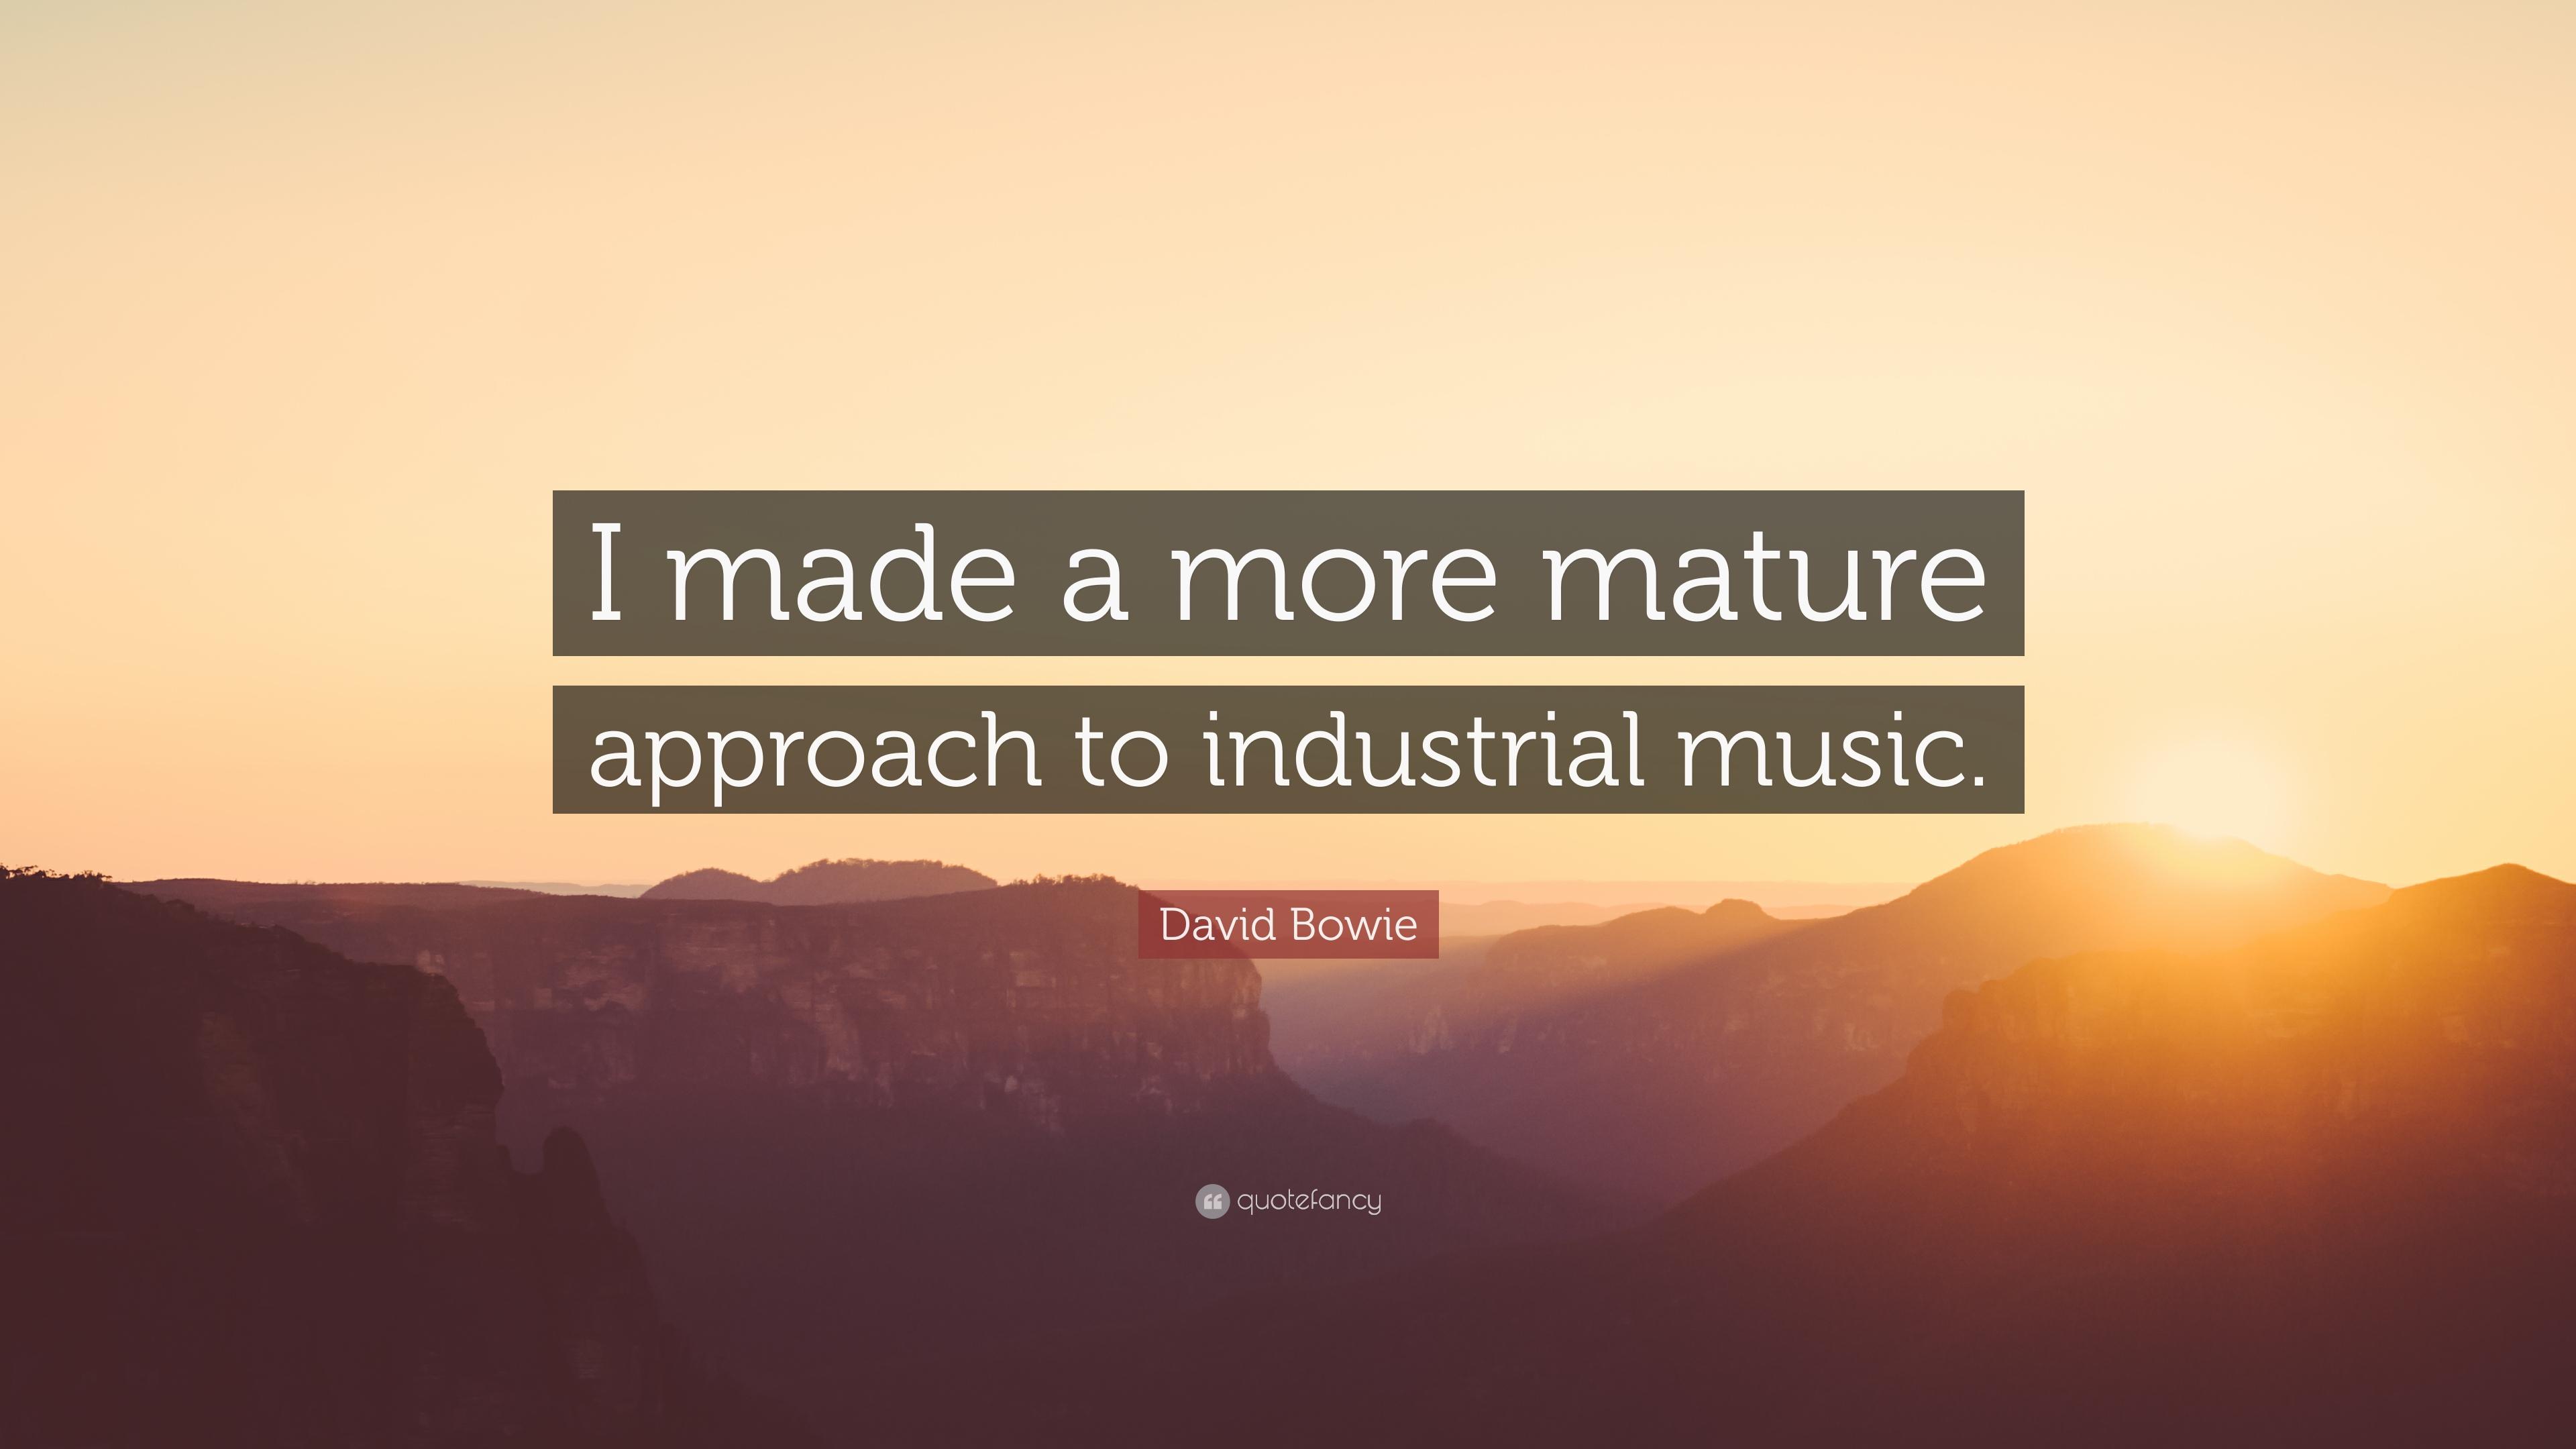 David Bowie Quote: “I made a more mature approach to industrial